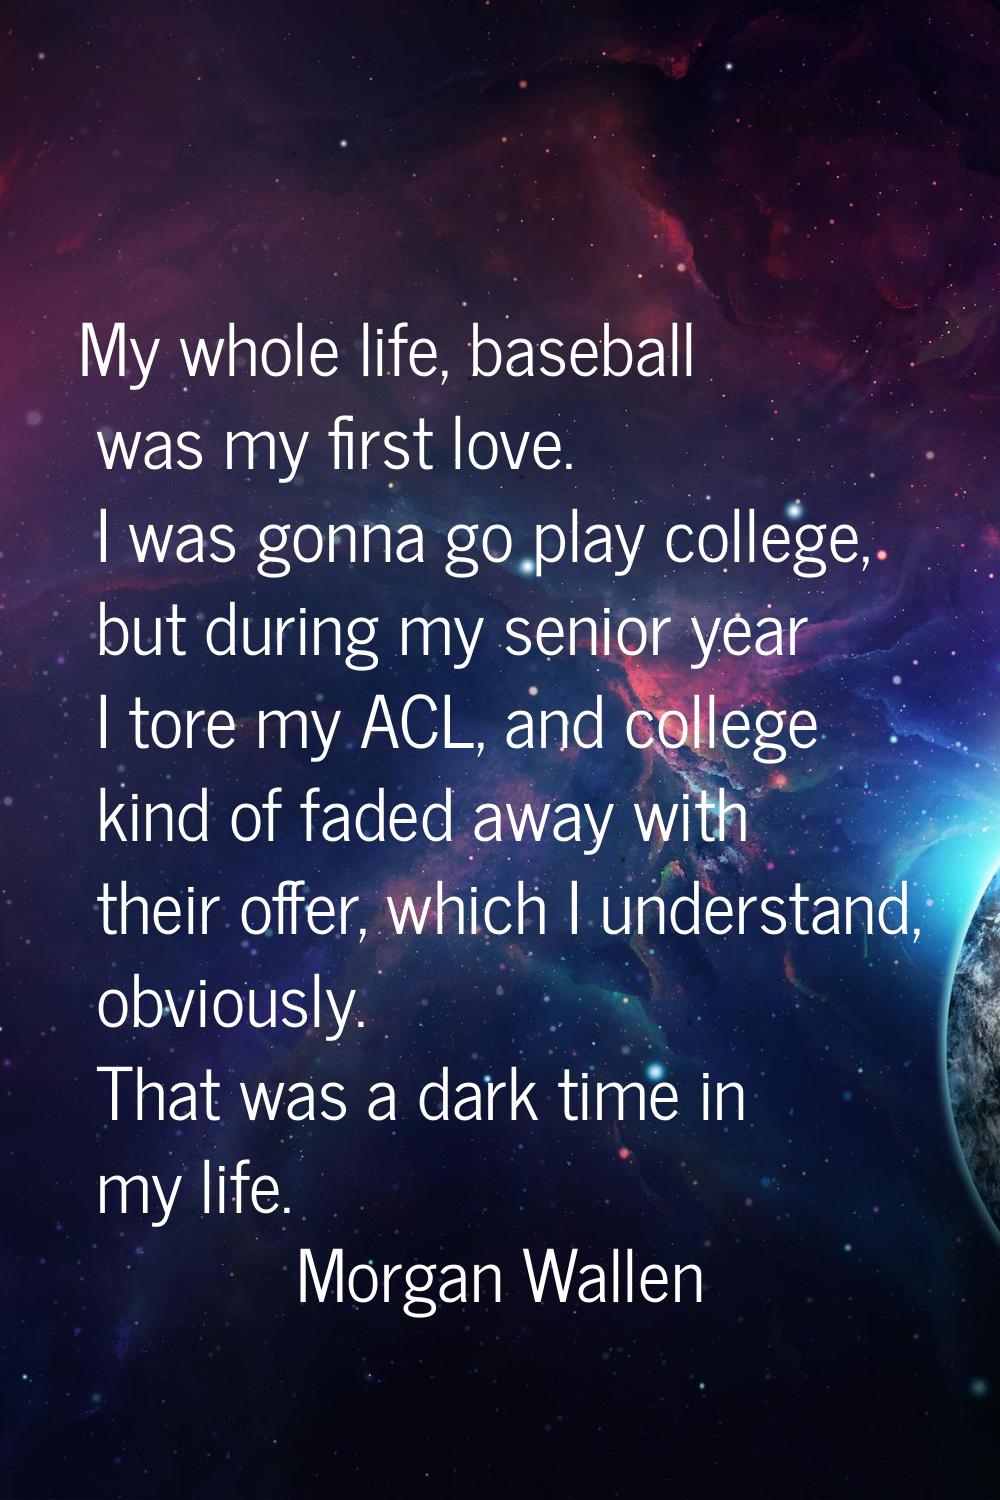 My whole life, baseball was my first love. I was gonna go play college, but during my senior year I